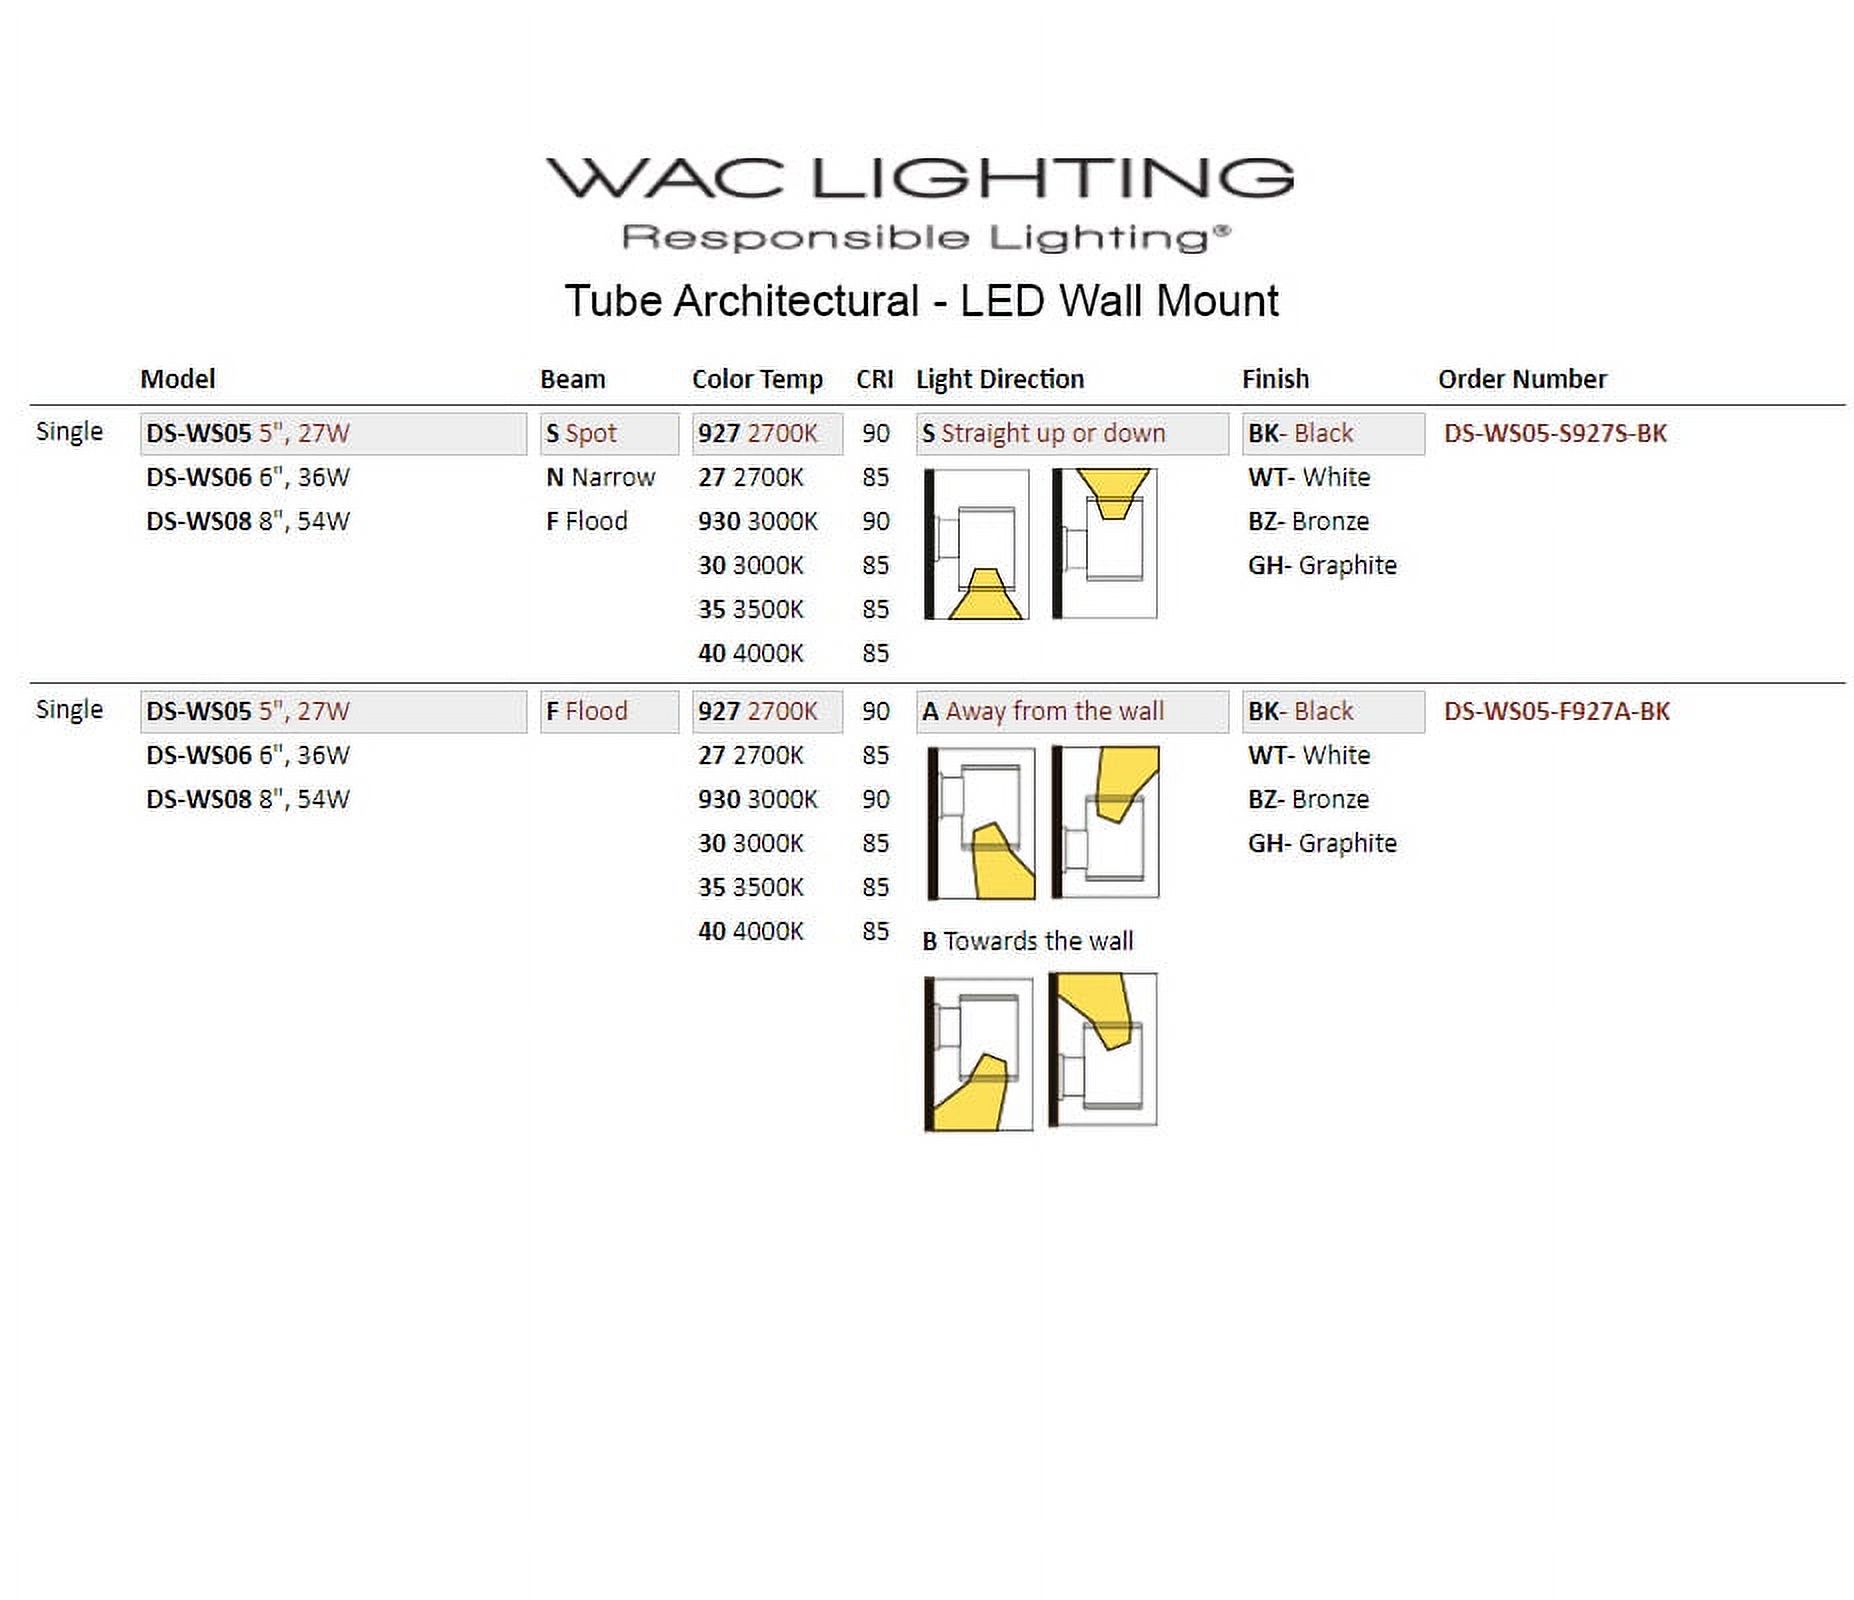 Wac Lighting Ds-Ws05-Fb Tube Architectural 1 Light 7" Tall Led Outdoor Wall Sconce - Black - image 5 of 5